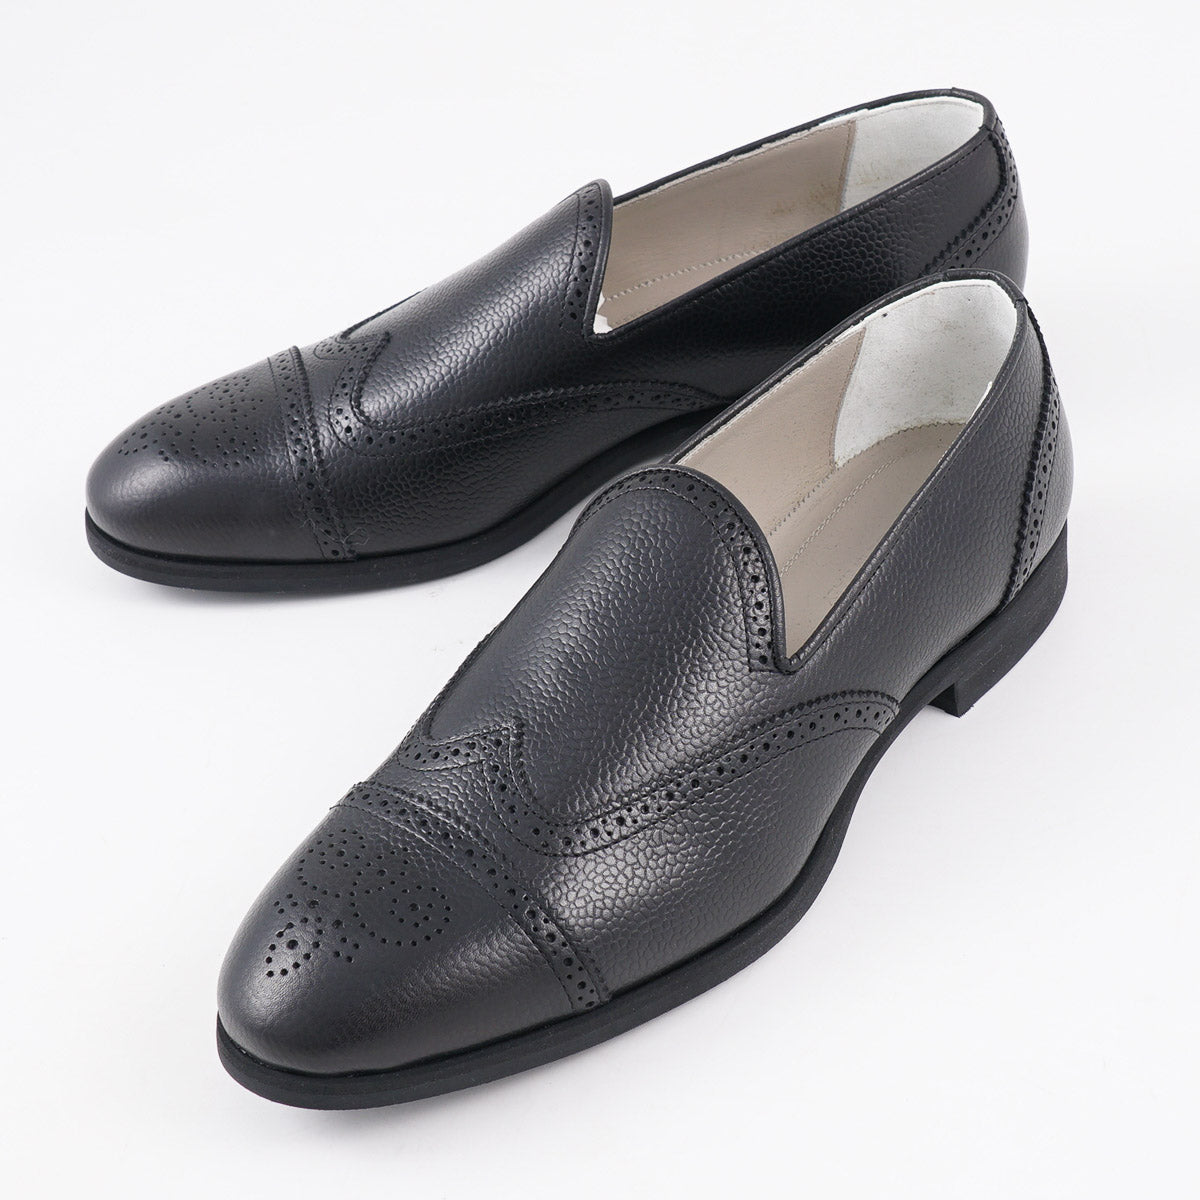 Kiton Soft Pebbled Leather Loafer - Top Shelf Apparel